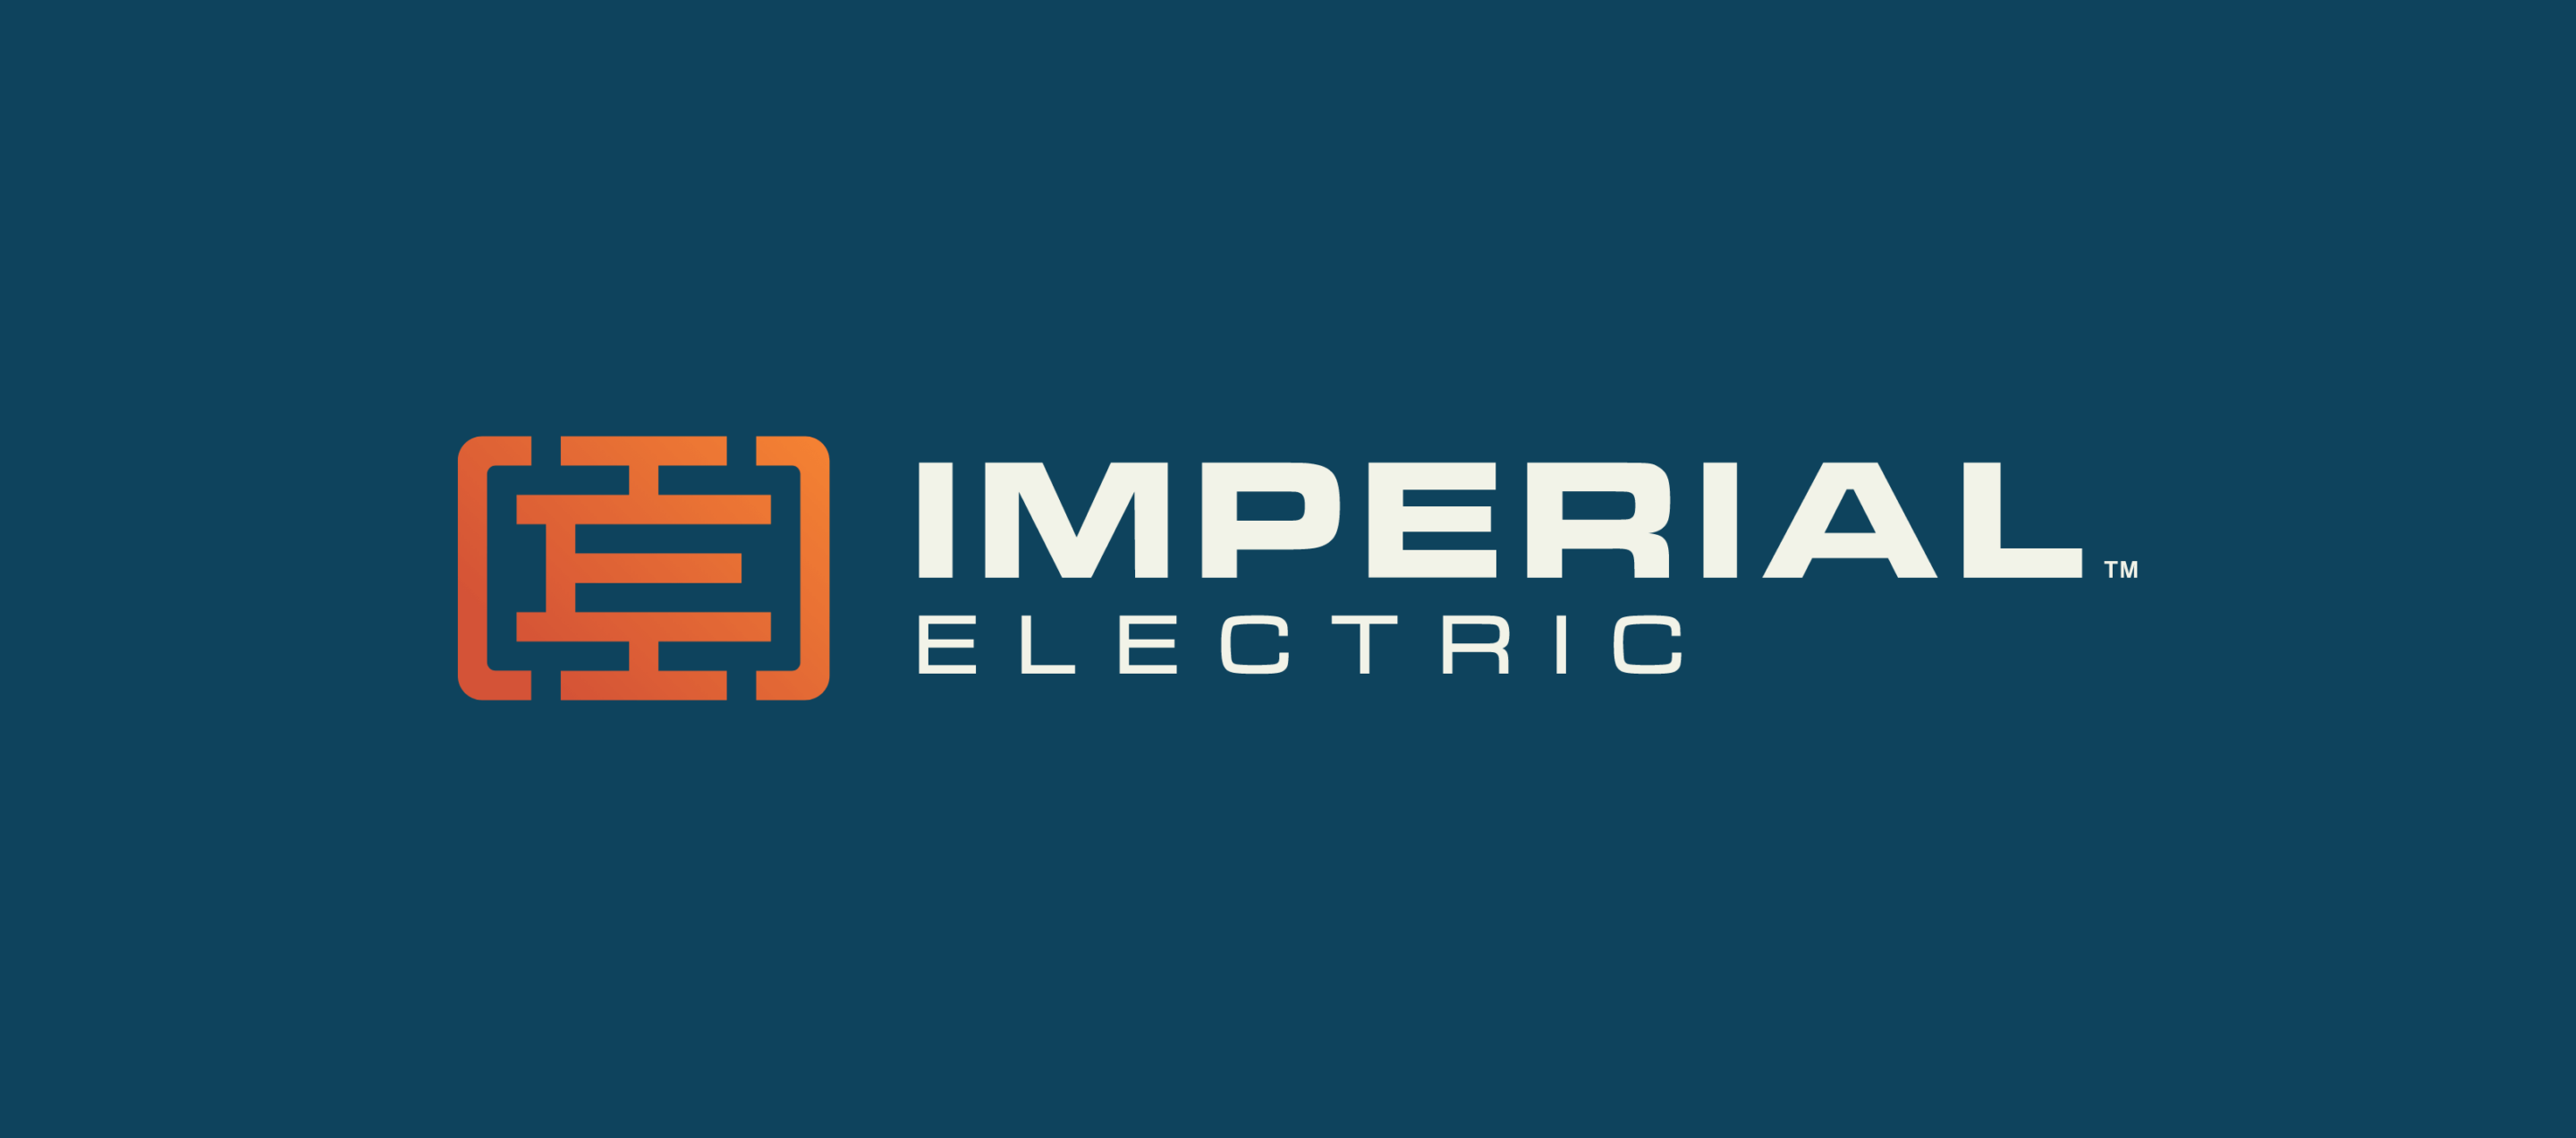 Imperial Electric logo 